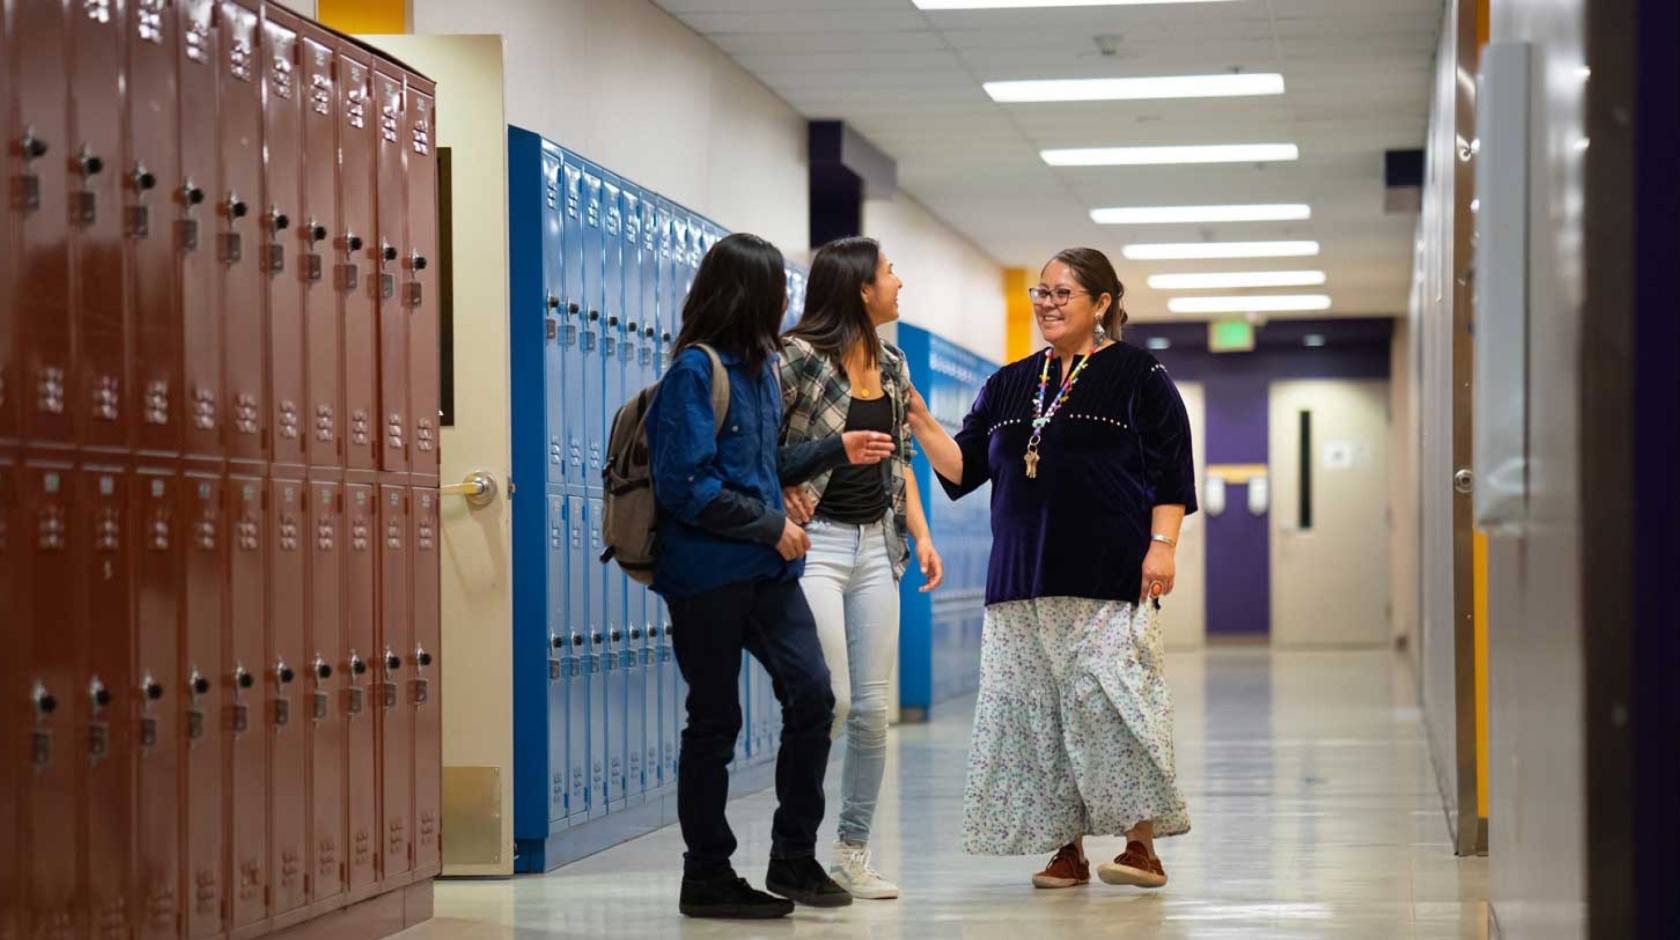 An adult talking with two high school students in a school hallway, with rows of lockers in the background